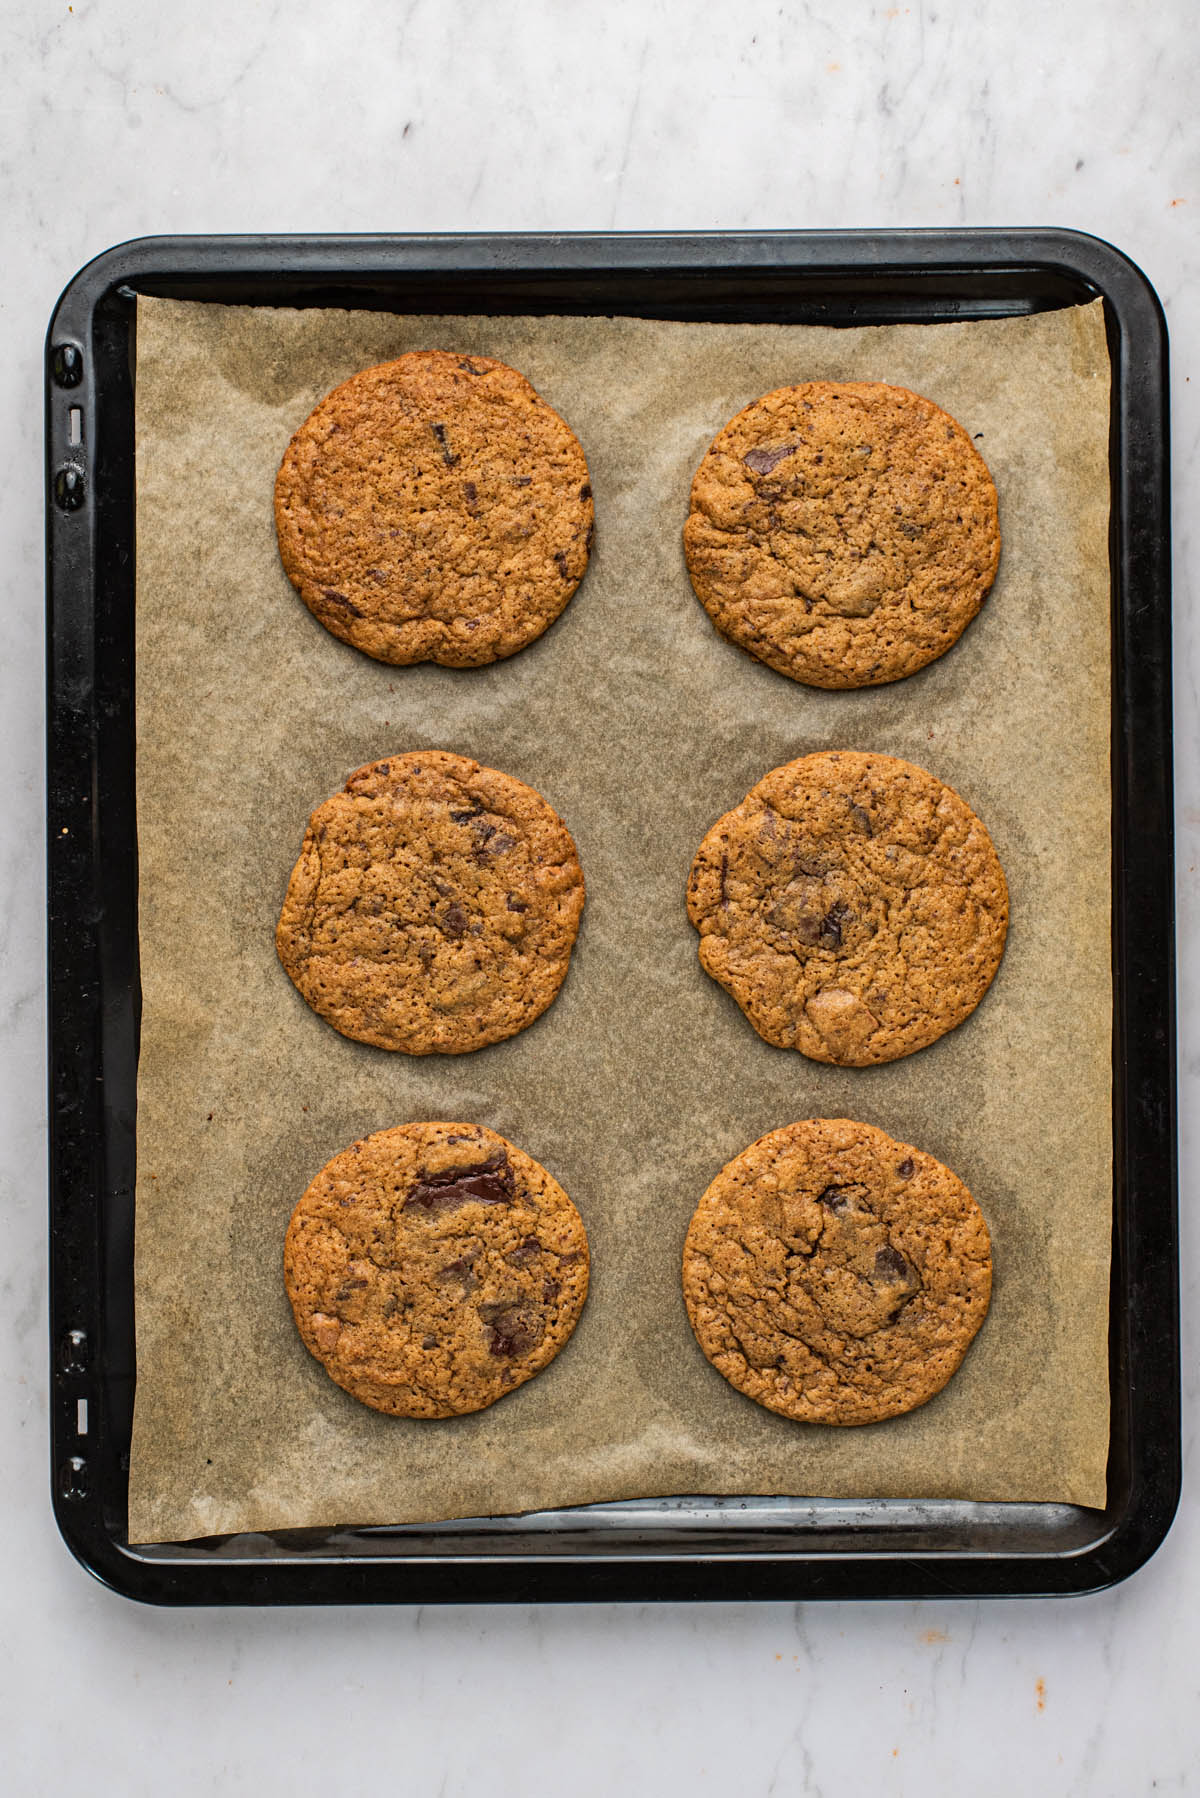 Six large cookies on a baking sheet, baked.